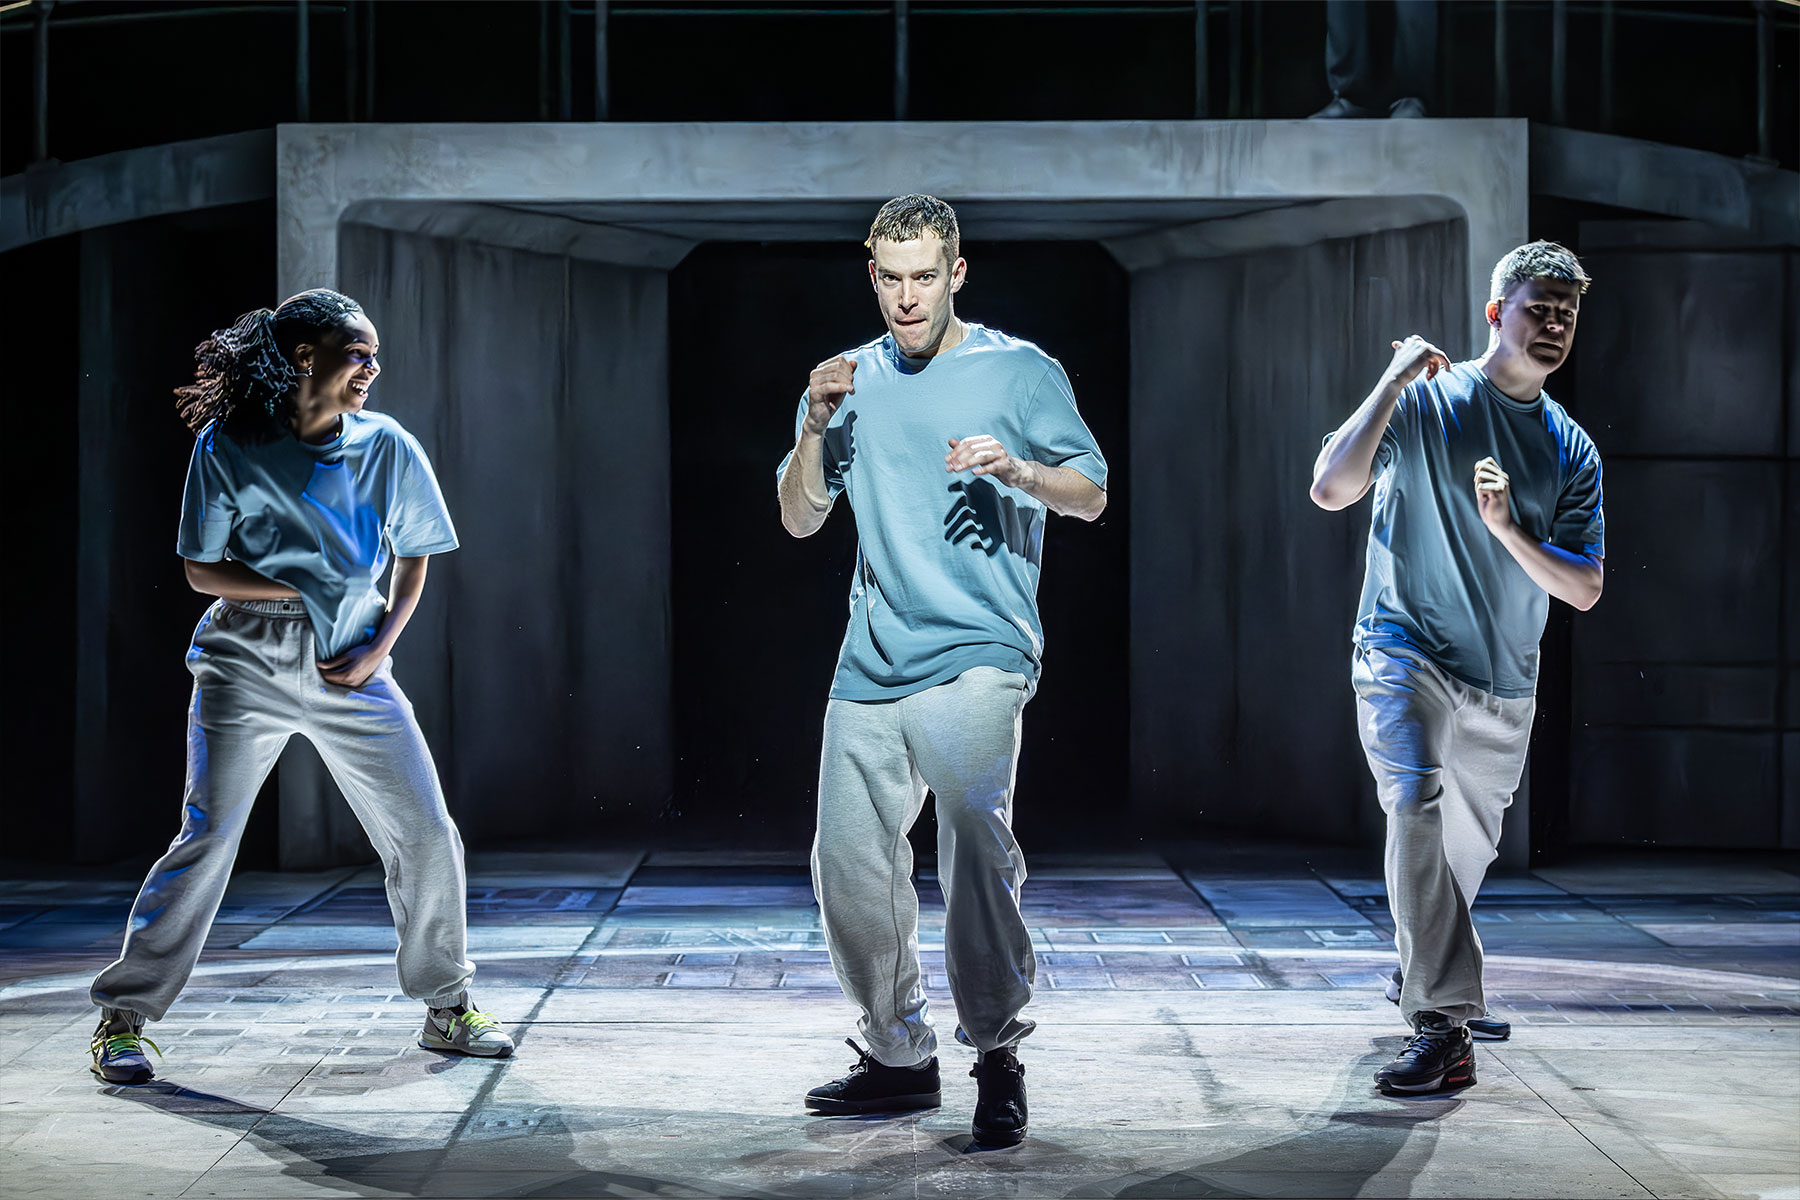 Shalisha James-Davis, David Shields and Alec Boaden in a scene from Punch at Nottingham Playhouse